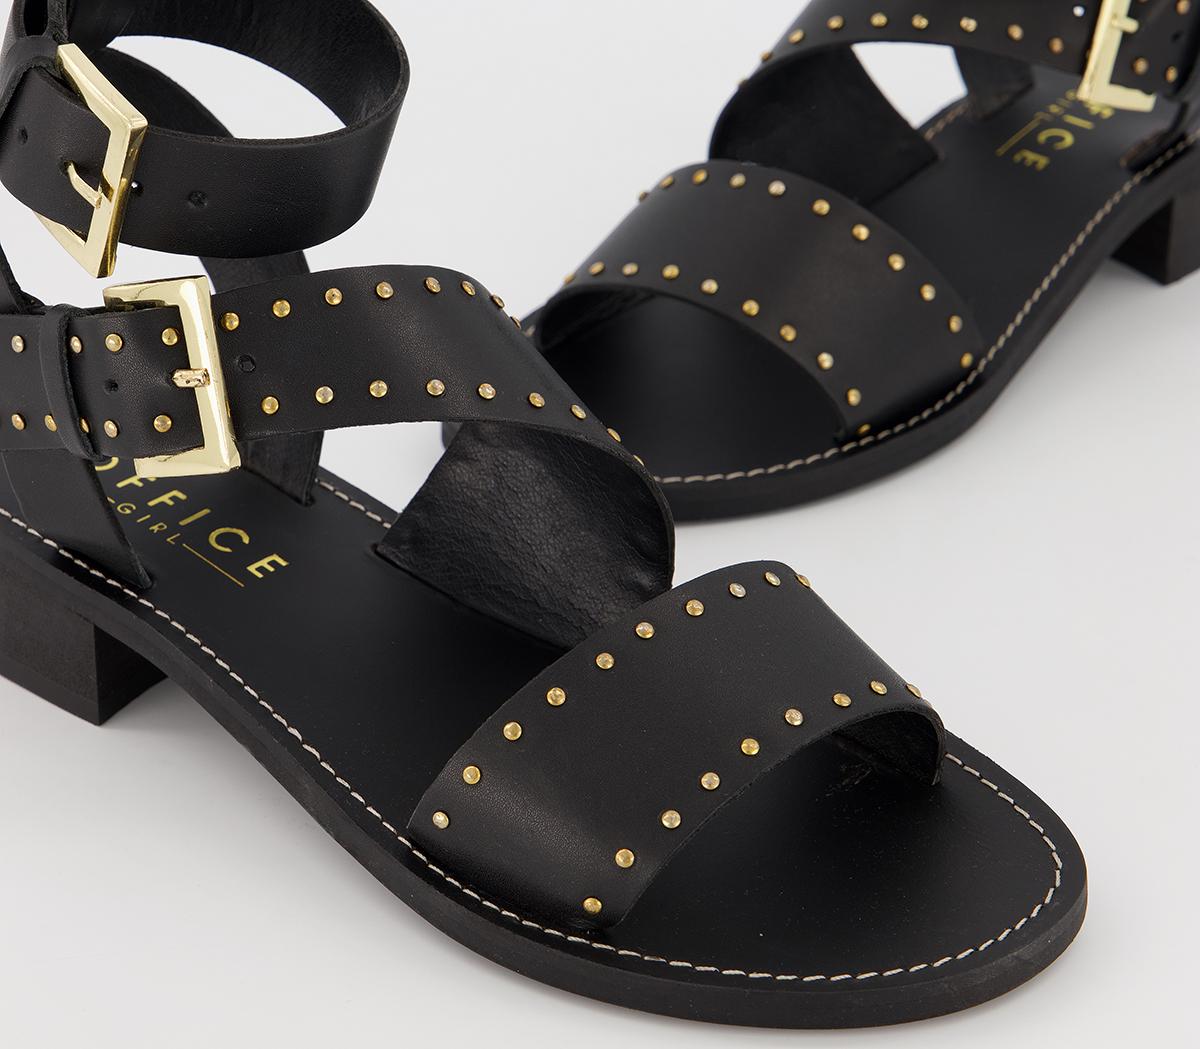 Office Sailing Buckle Sandals Black Leather With Gold Studs - Women’s ...